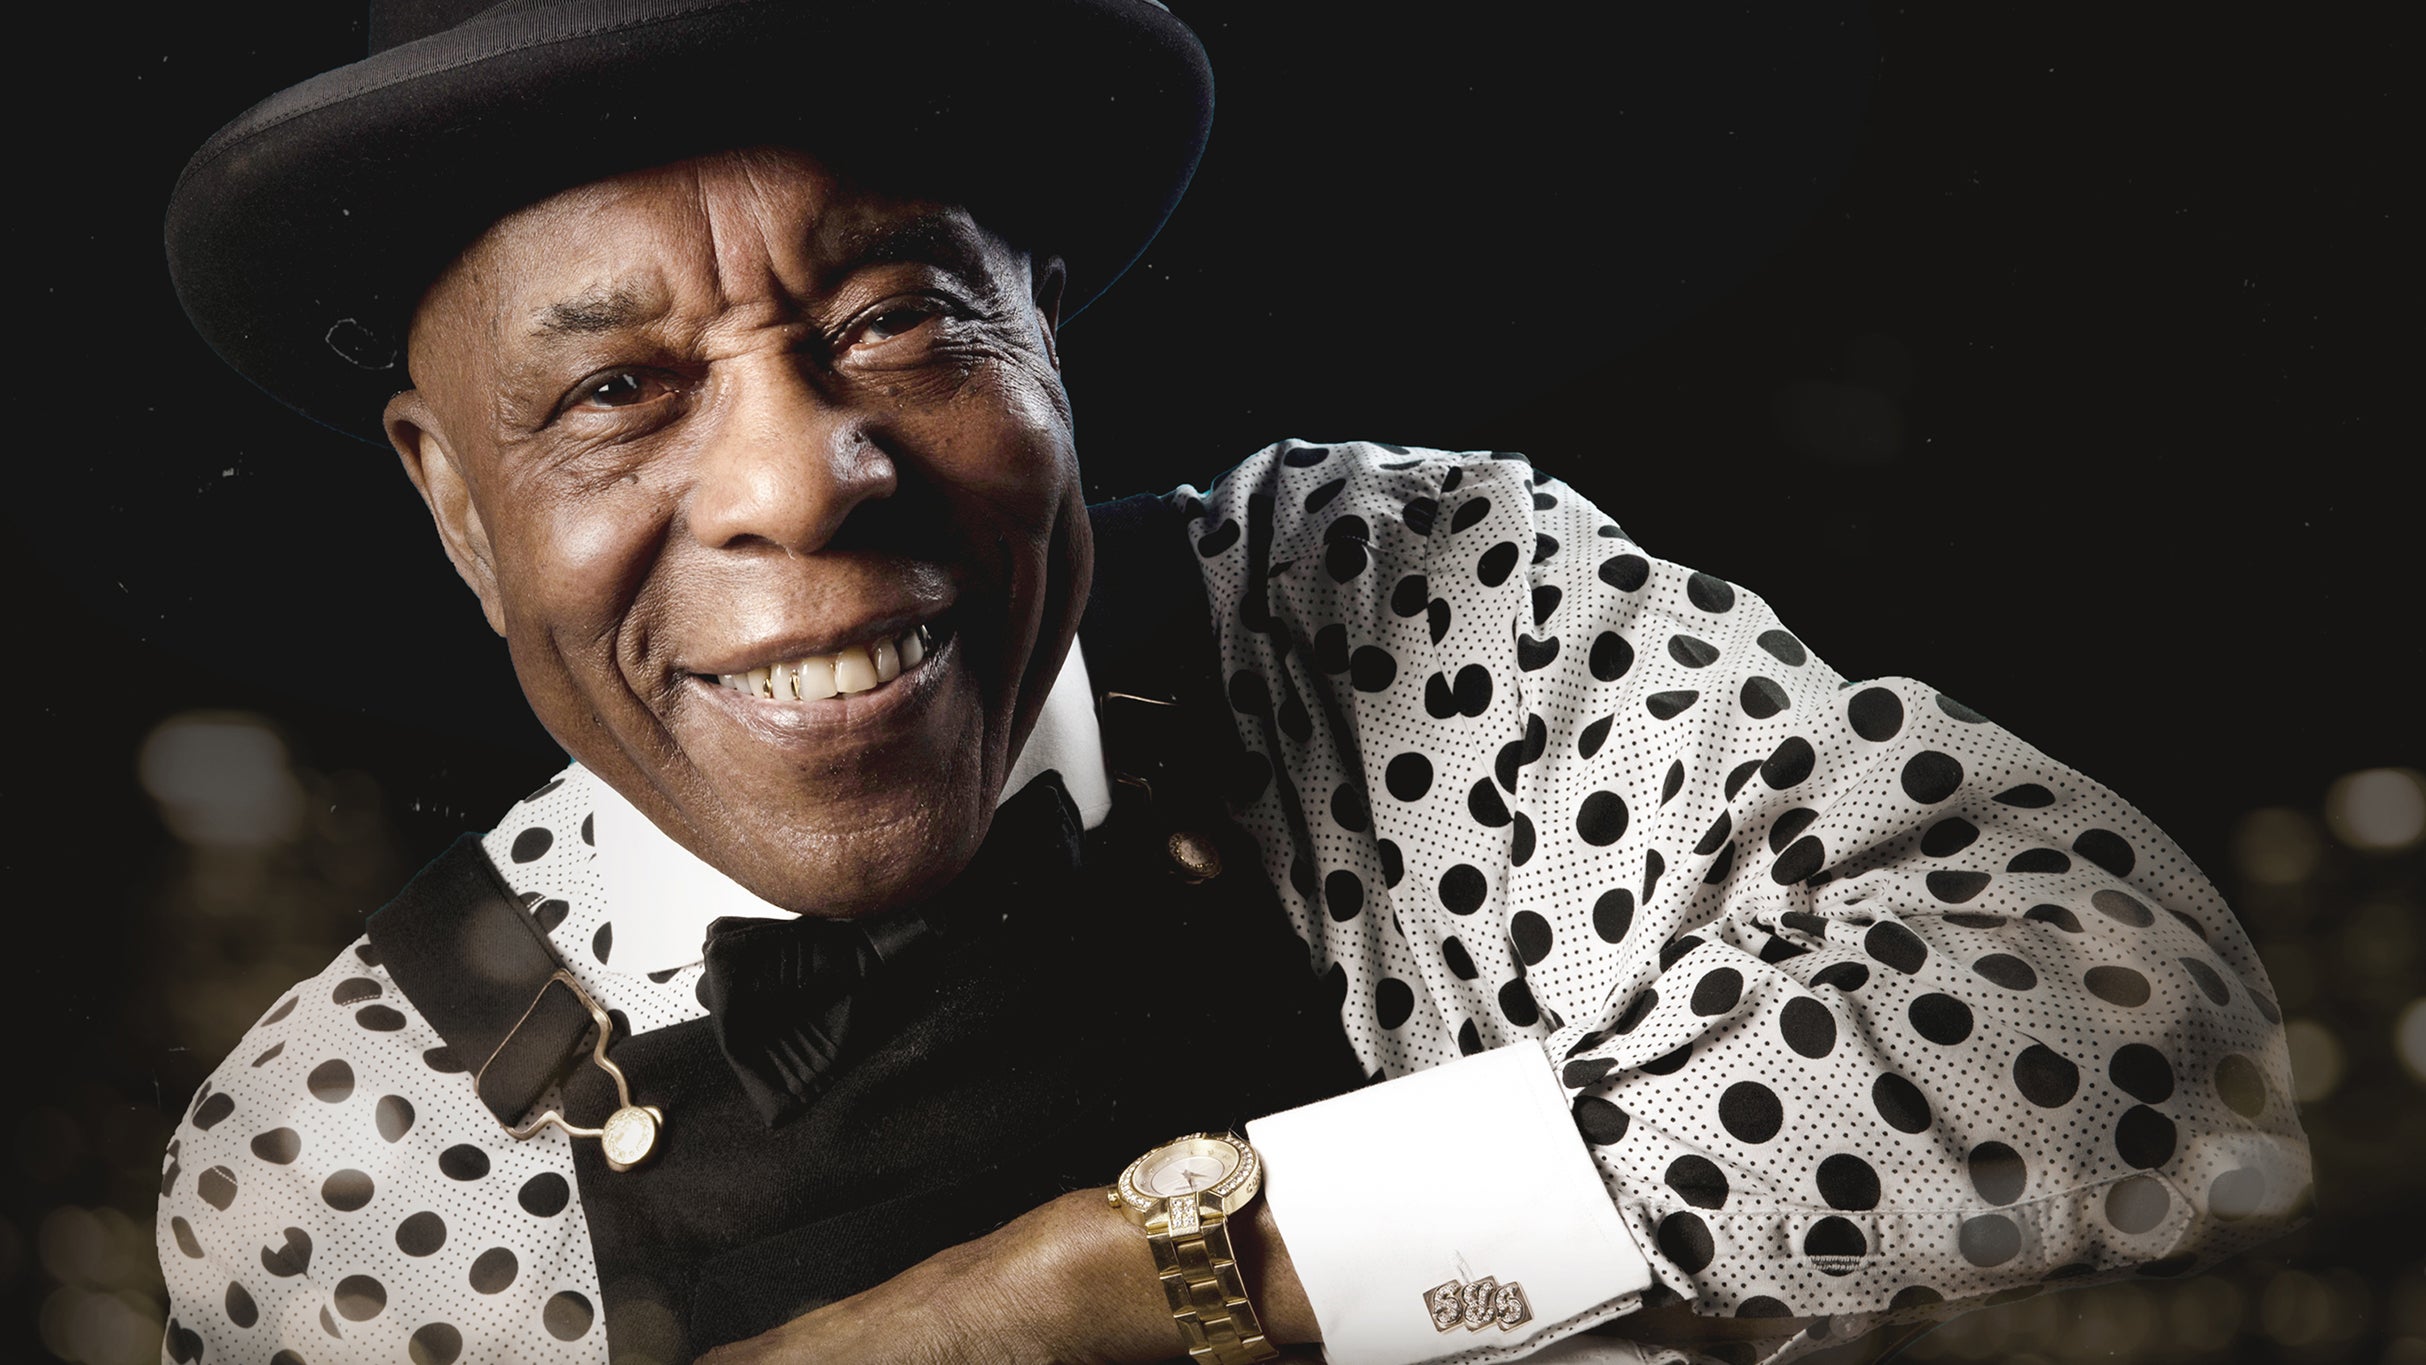 Buddy Guy Damn Right Farewell Tour free presale code for early tickets in Birmingham